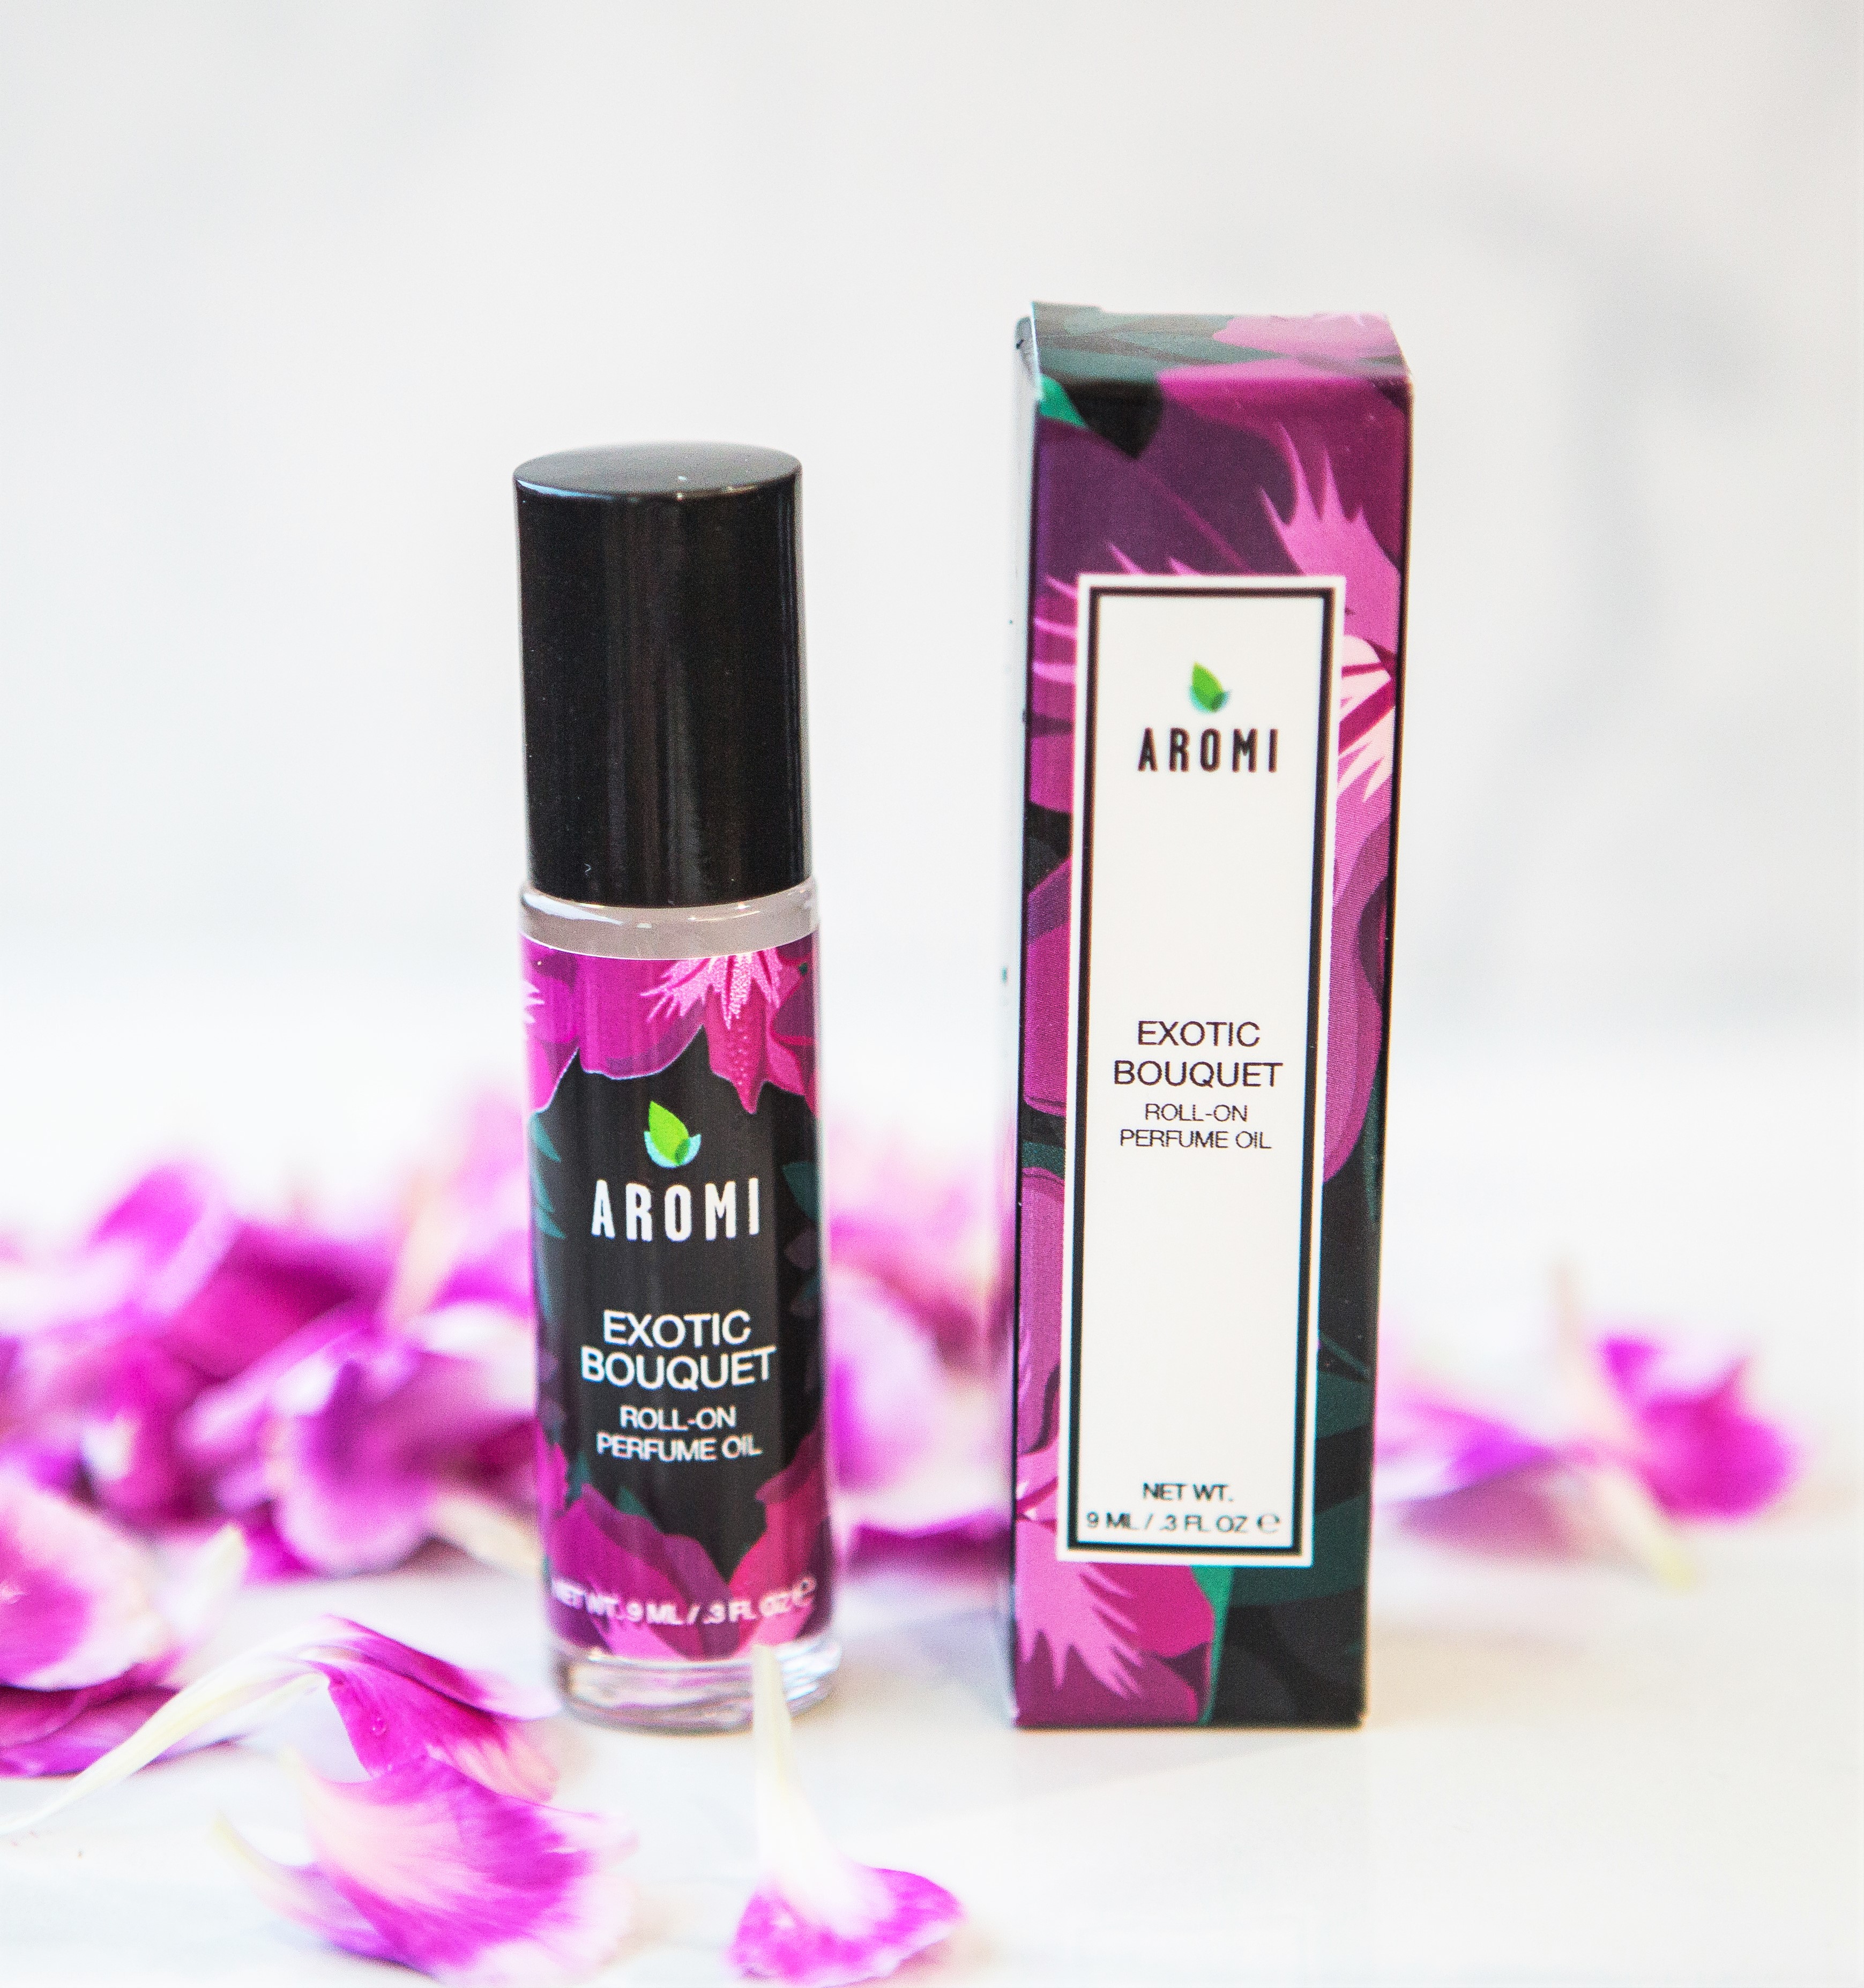 Aromi Exotic Bouquet Roll-on Perfume Oil